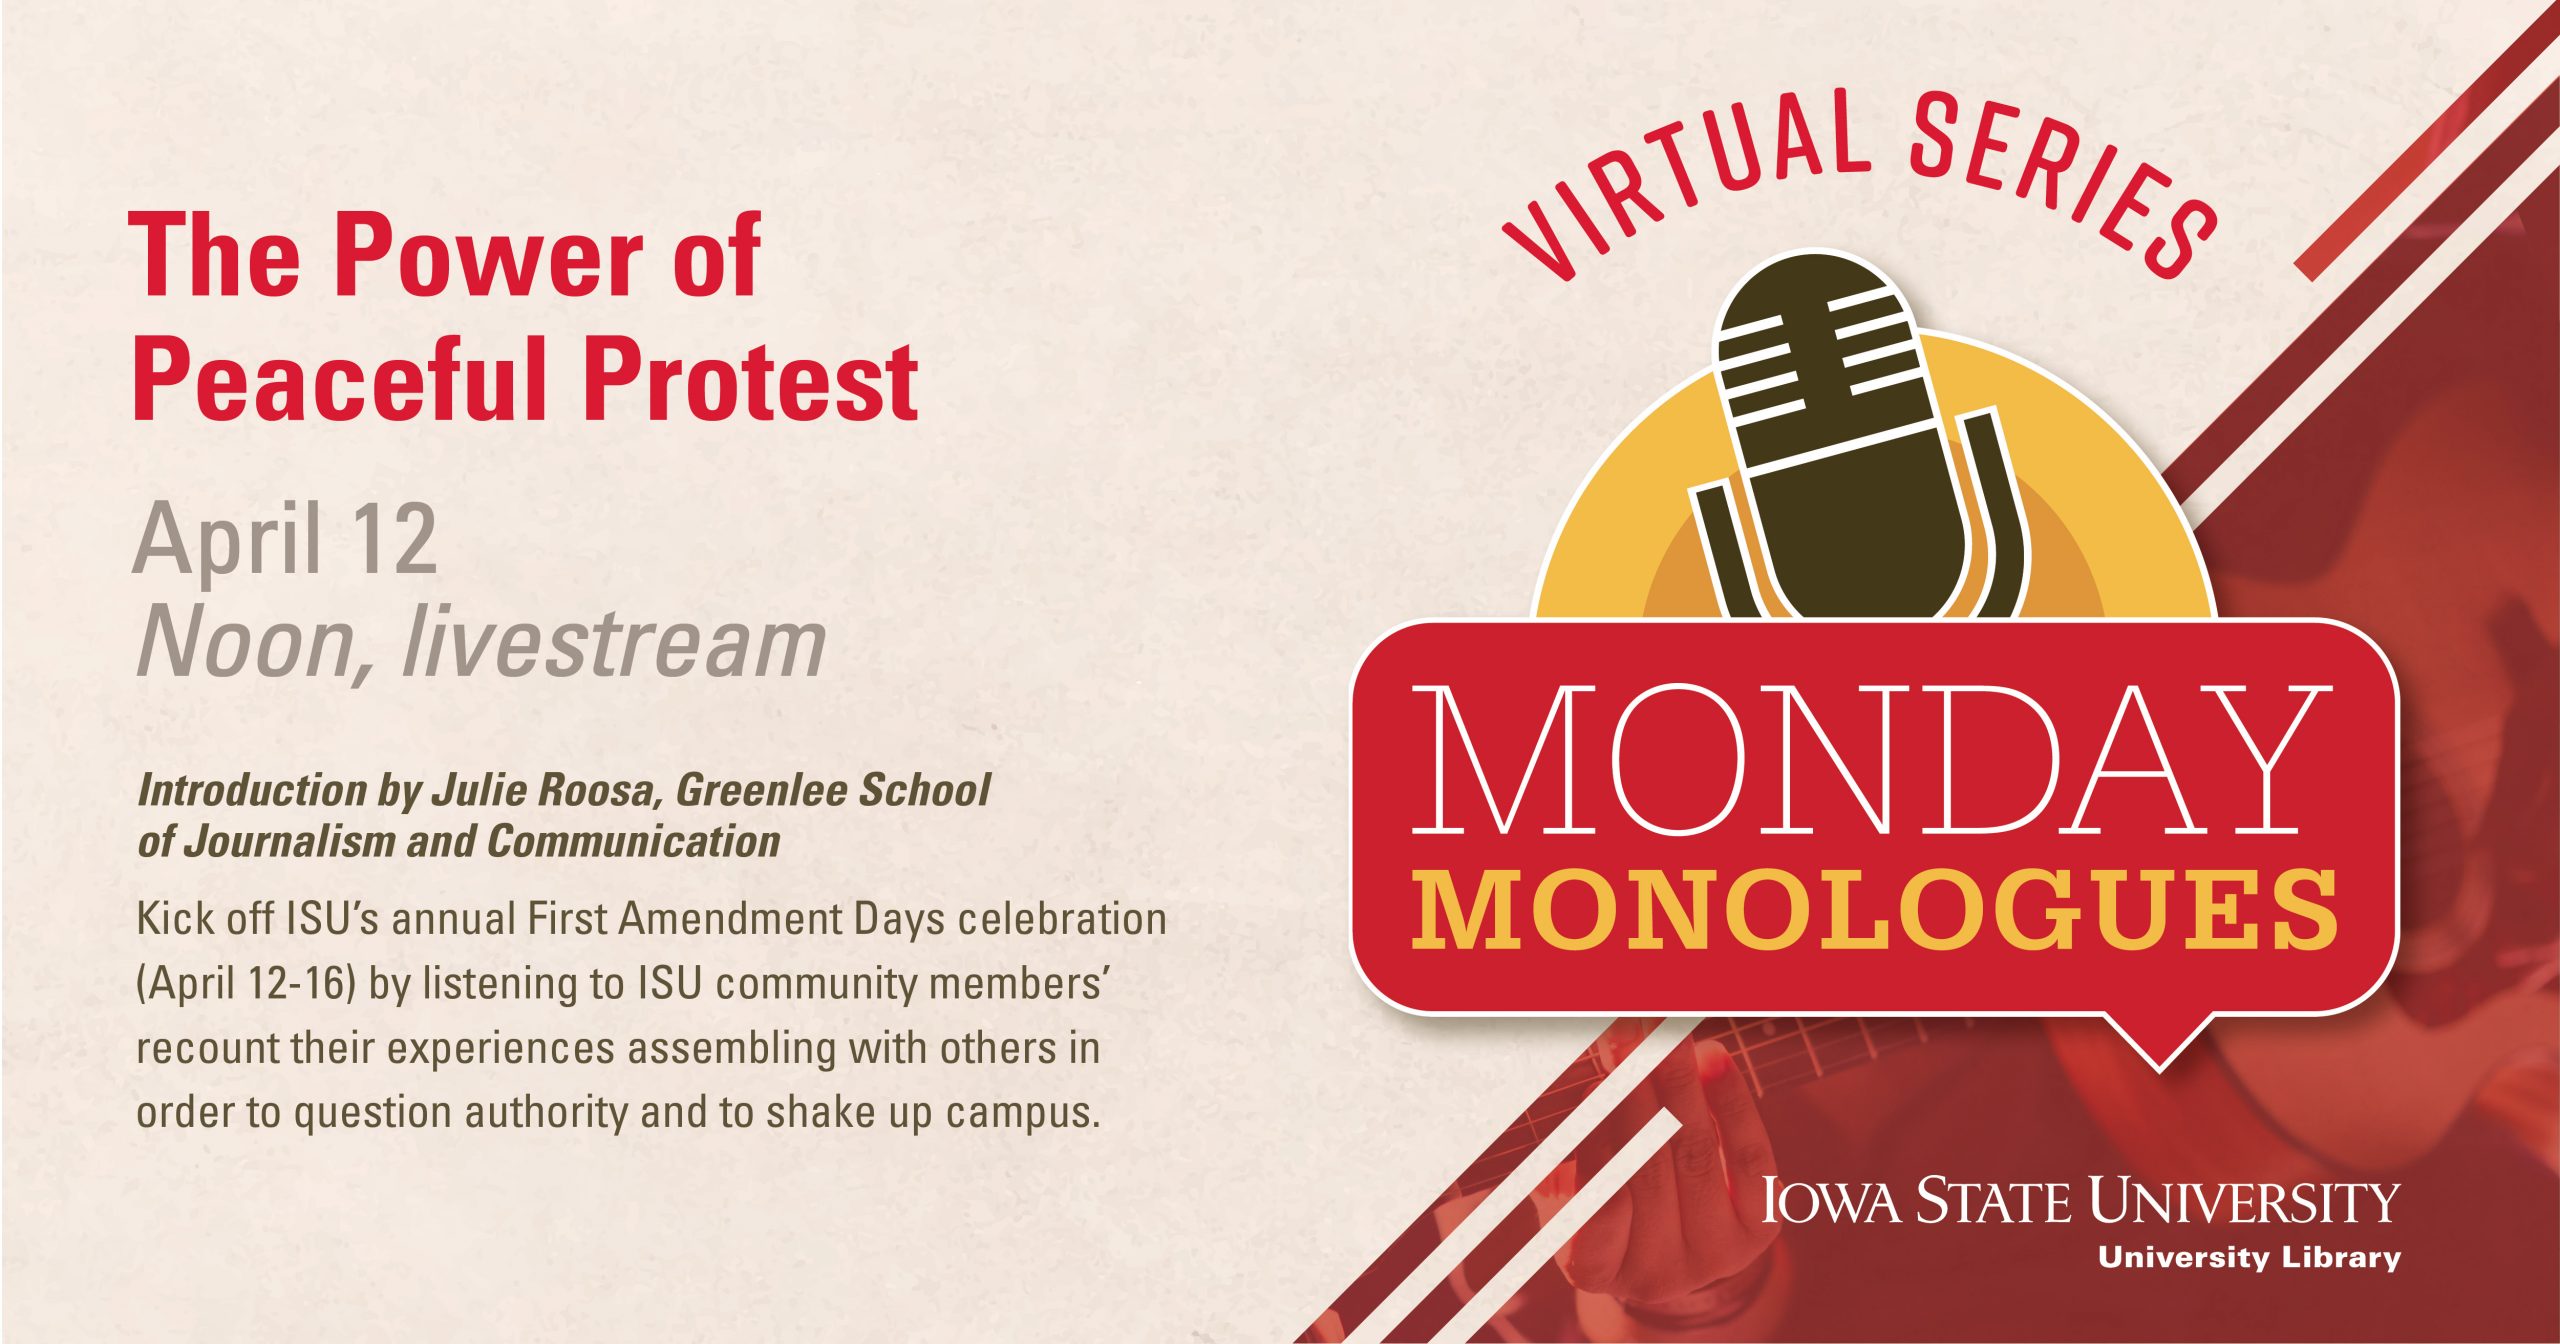 Monday Monologues The Power of Peaceful Protest • Events in the College of Liberal Arts and Sciences • Iowa State University